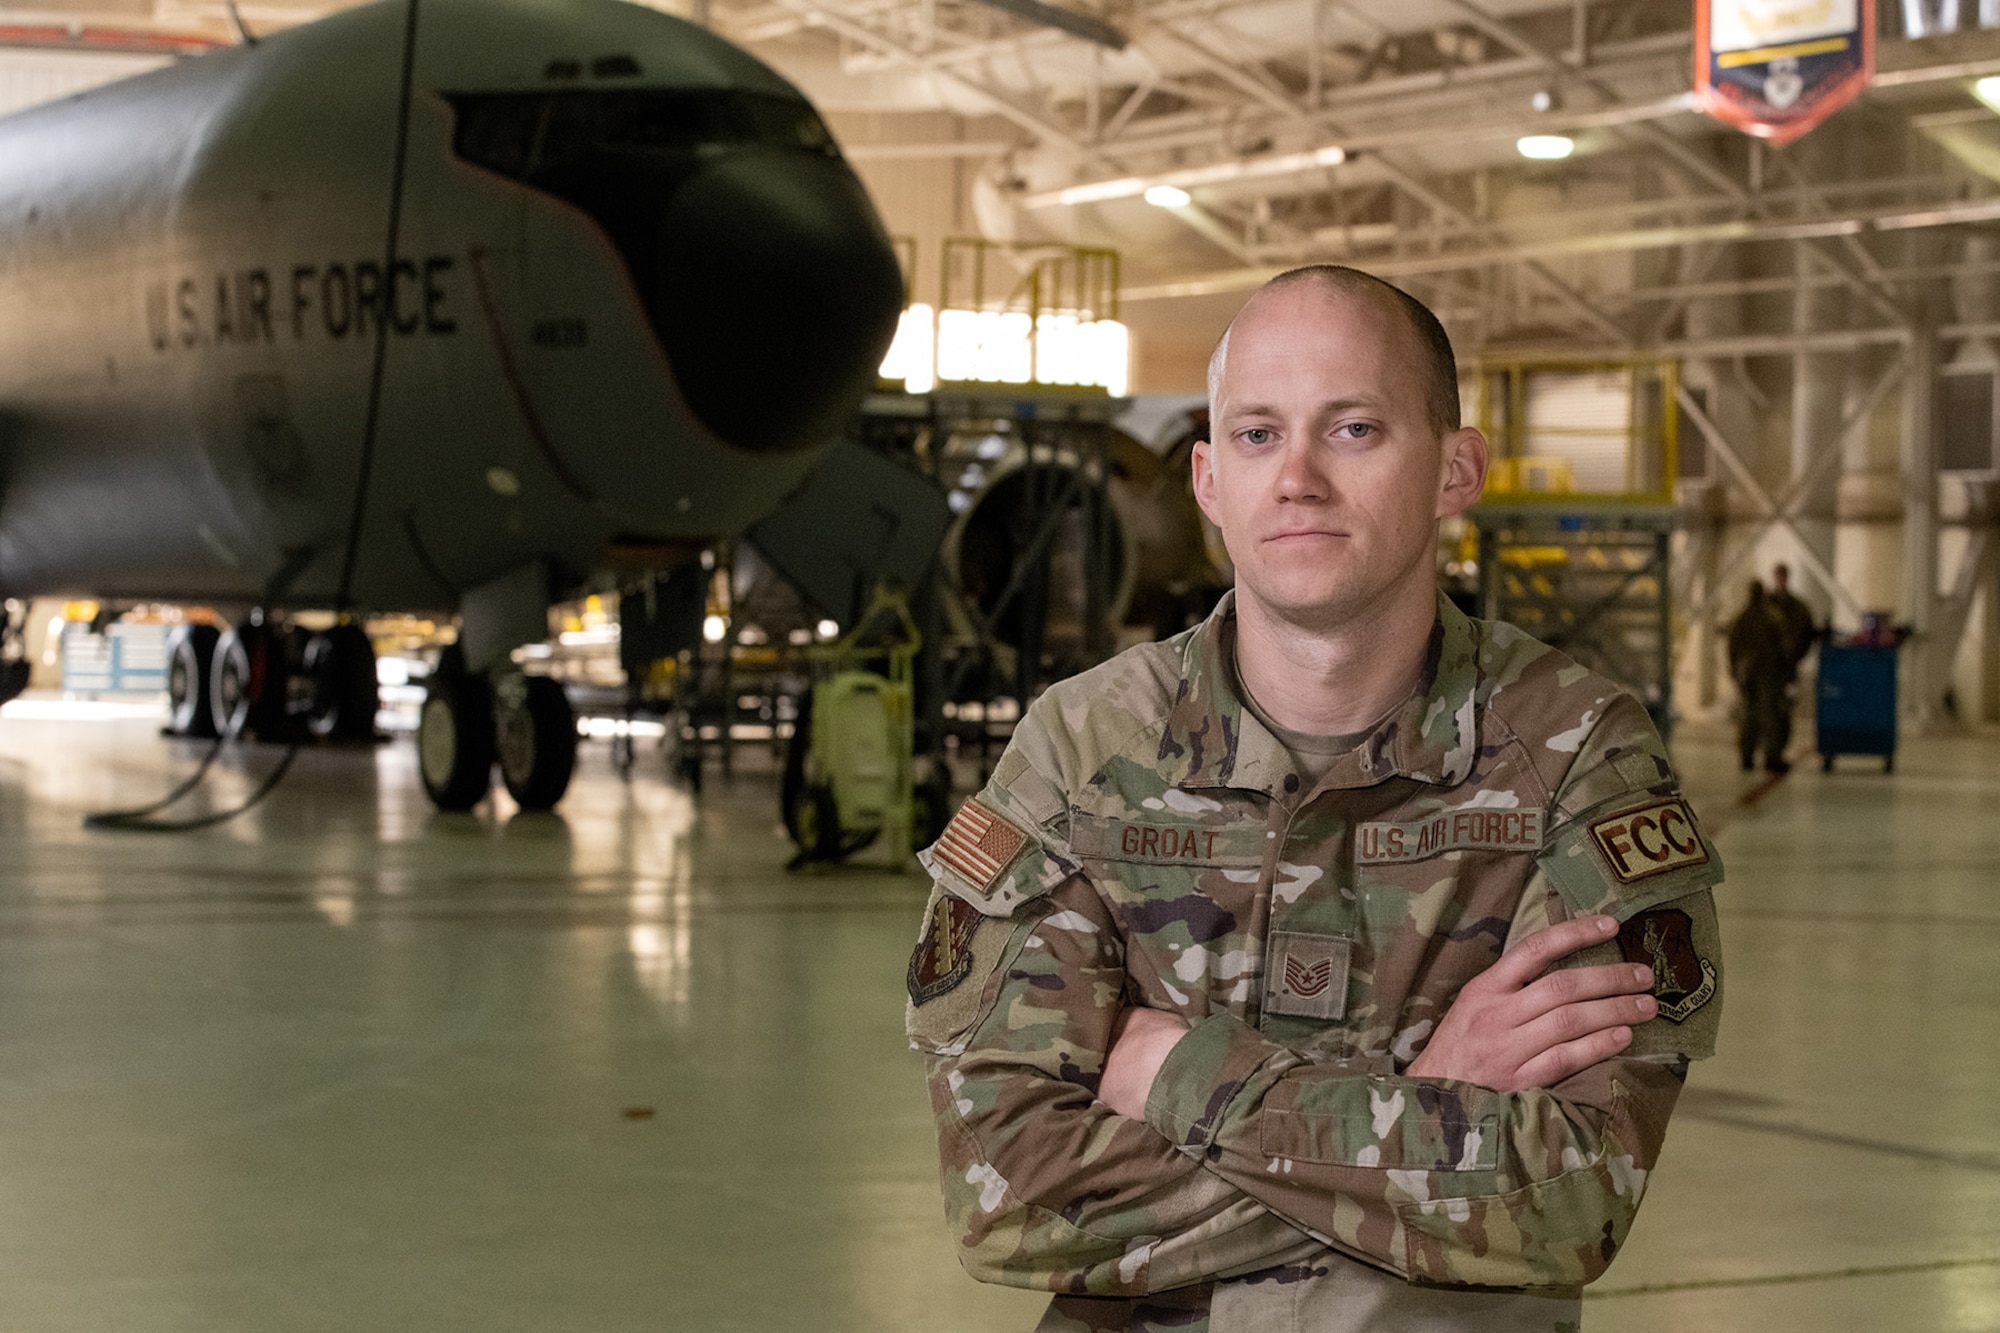 A U.S. Air Force member is shown in uniform in front of a KC-135.